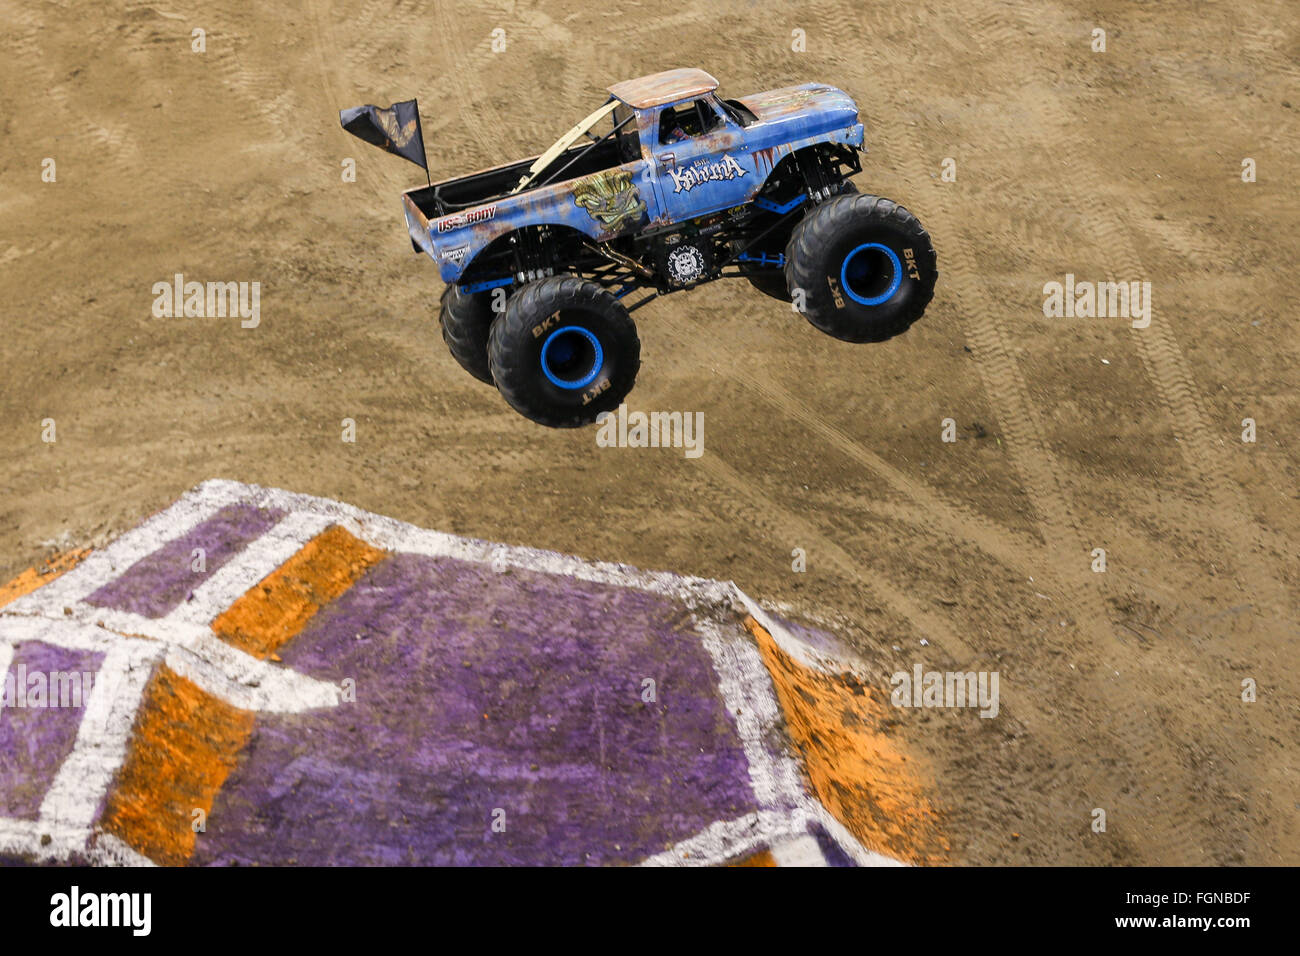 New Orleans, LA, USA. 20th Feb, 2016. Big Kahuna monster truck in action  during Monster Jam at the Mercedes-Benz Superdome in New Orleans, LA.  Stephen Lew/CSM/Alamy Live News Stock Photo - Alamy